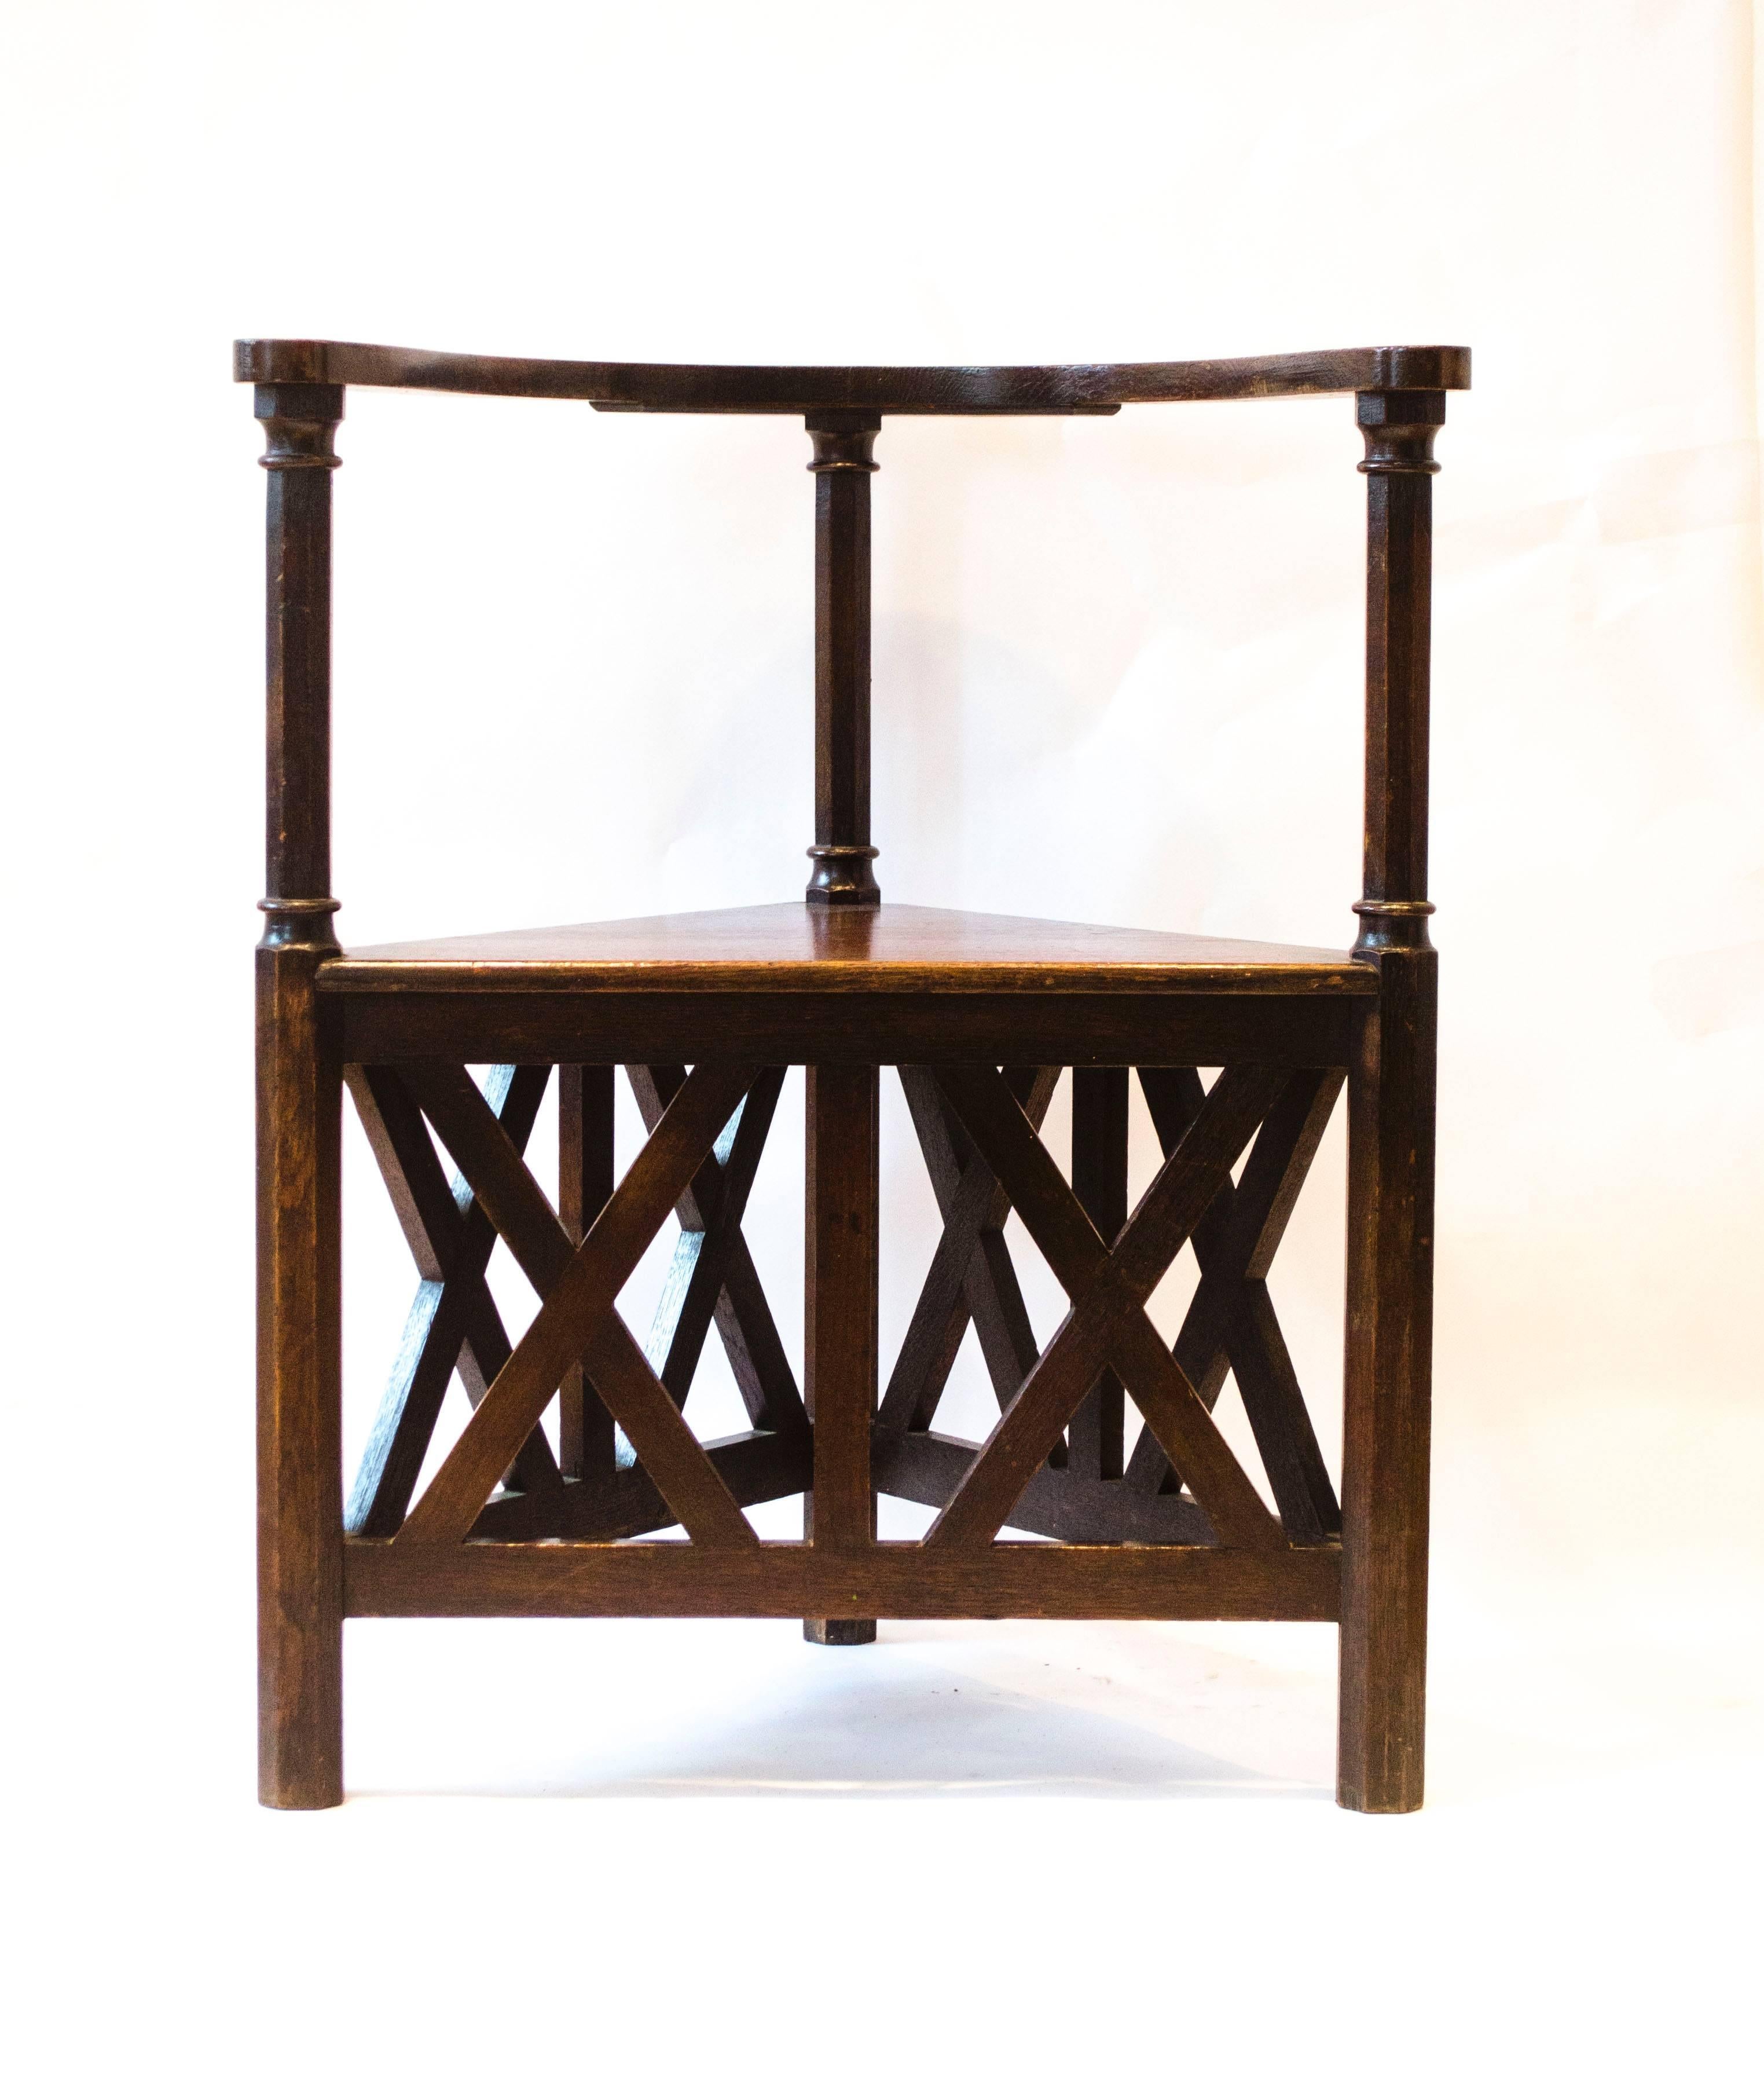 Josef Hoffmann (1870-1956) designed for the 5th Viennese Secession exhibition in 1899.
An exceptional oak corner armchair. 
The last image is of an identical armchair designed by Hoffmann which was exhibited at the Tate, Liverpool, in the 'Gustav